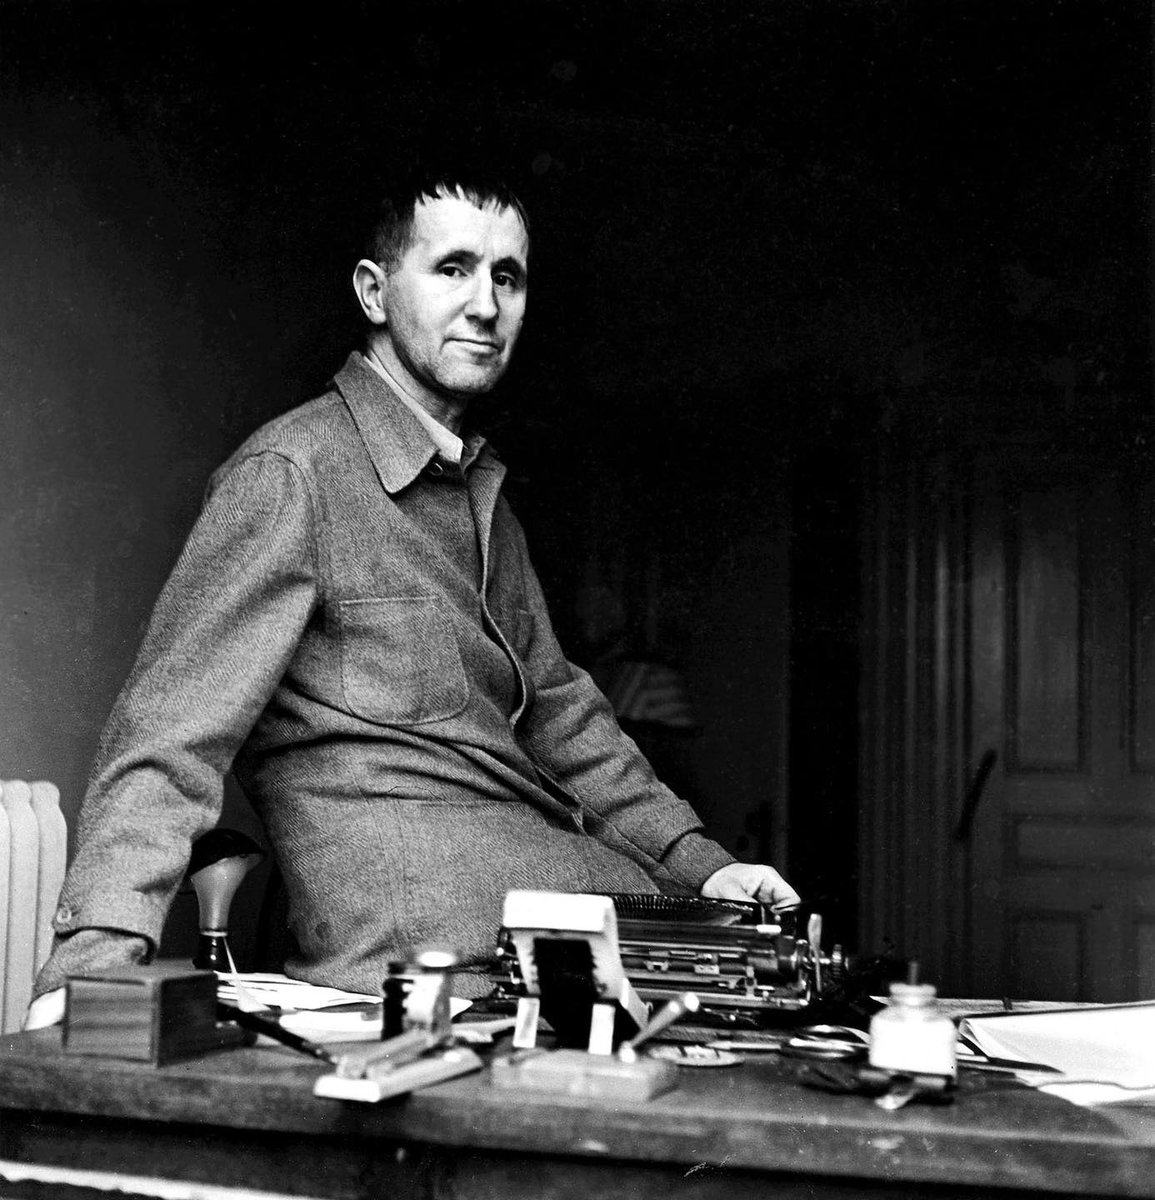 “To those who do not know that the world is on fire, I have nothing to say.”

―Bertolt Brecht